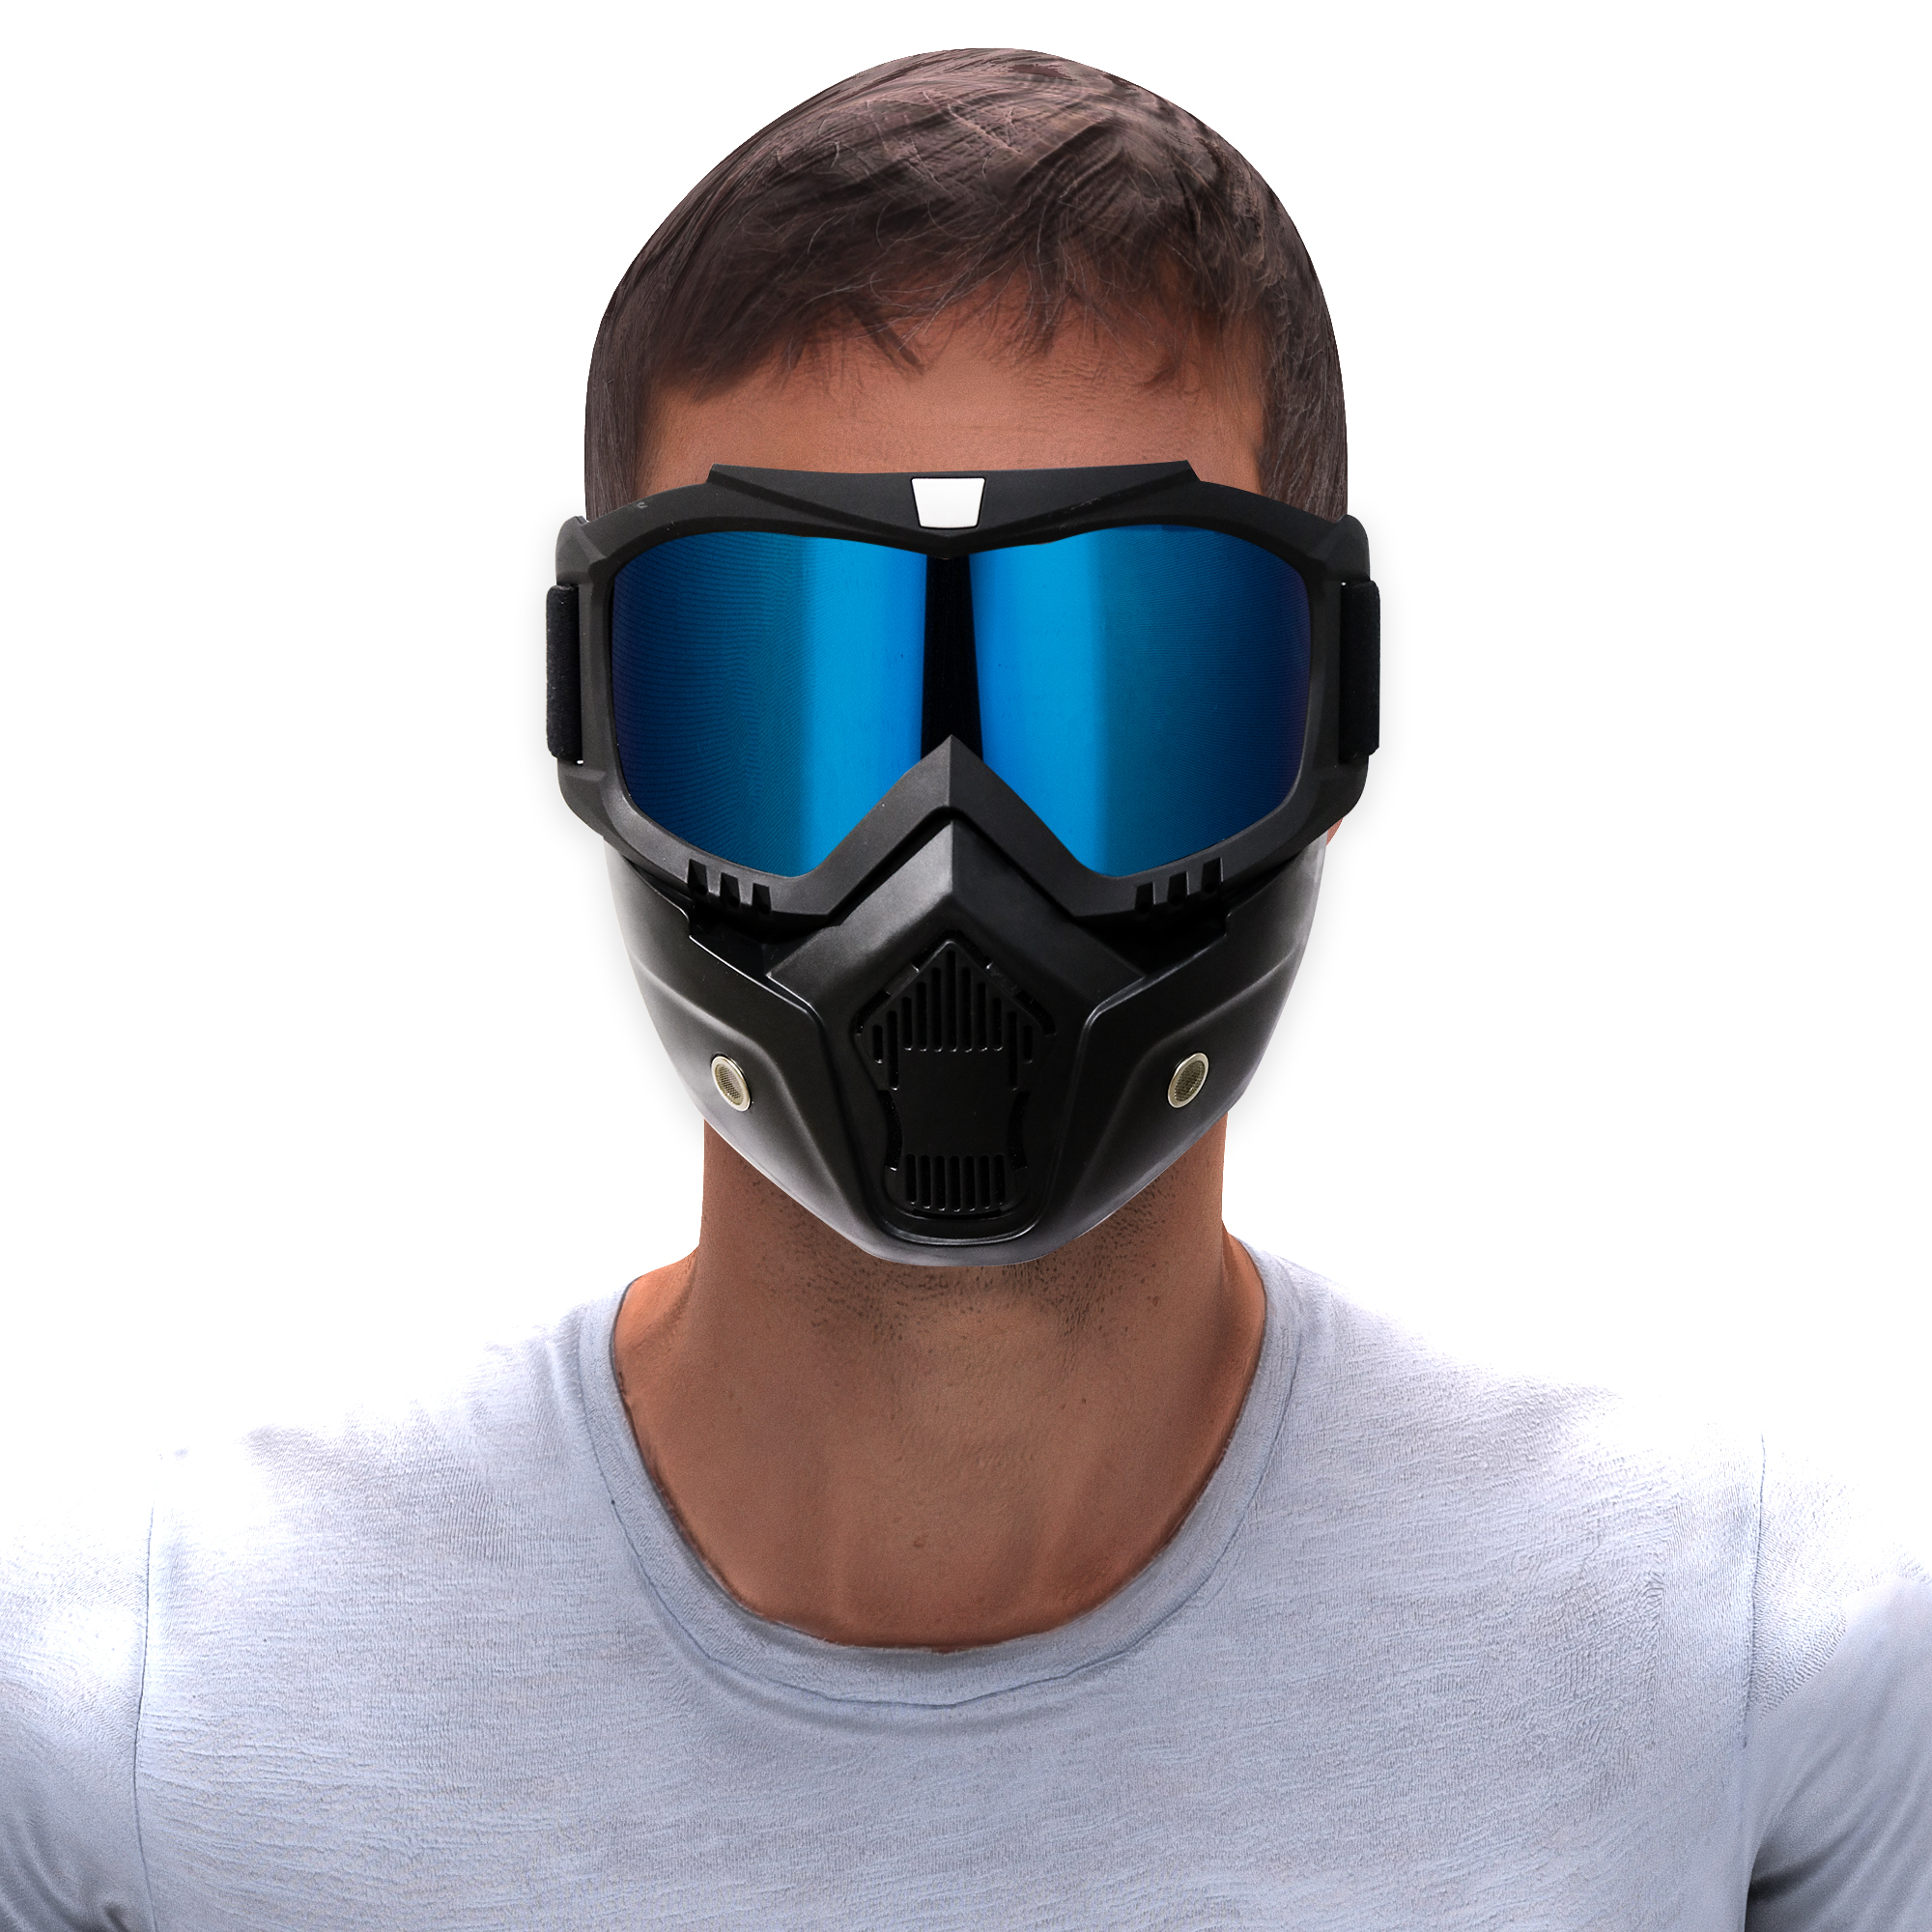 Steelbird 3 In 1 Unisex Face Shield Mask, Goggle (Blue Glass)